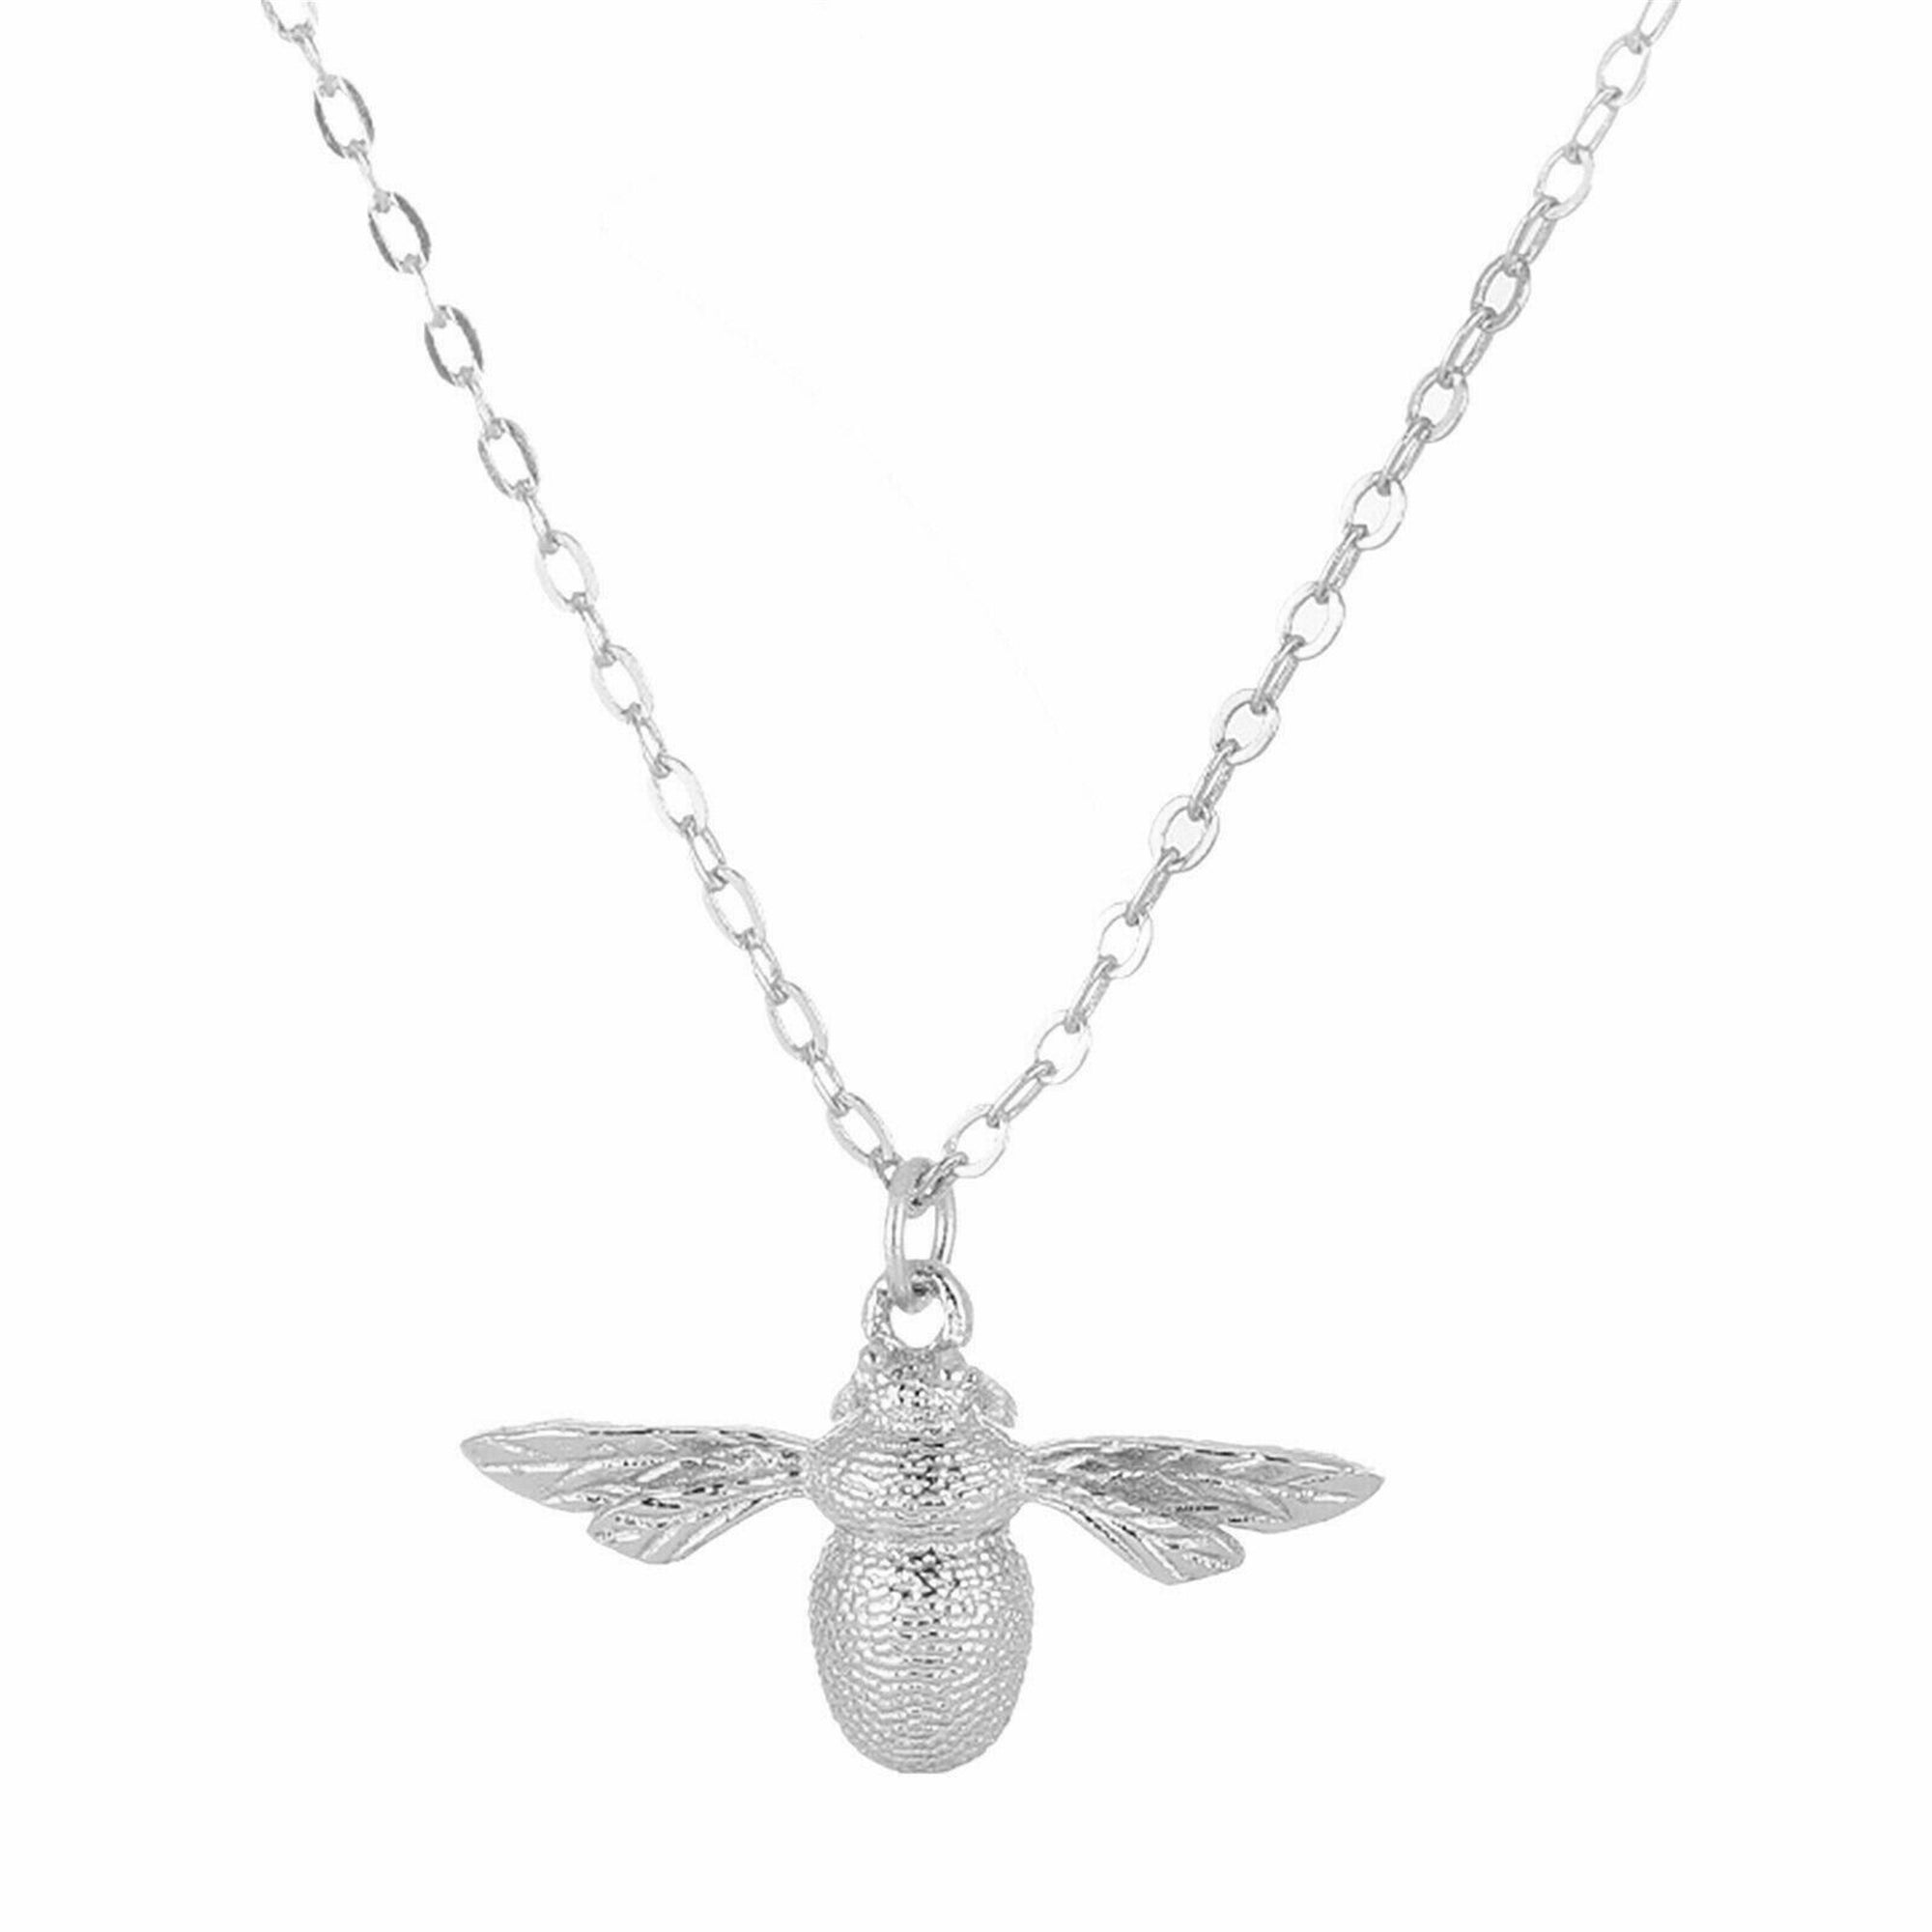 Buy Silver Bee Necklace / Tiny Silver Bumble Bee Pendant on a Sterling  Silver Chain ... Detailed Realistic Chubby Honey Bee Necklace Online in  India - Etsy